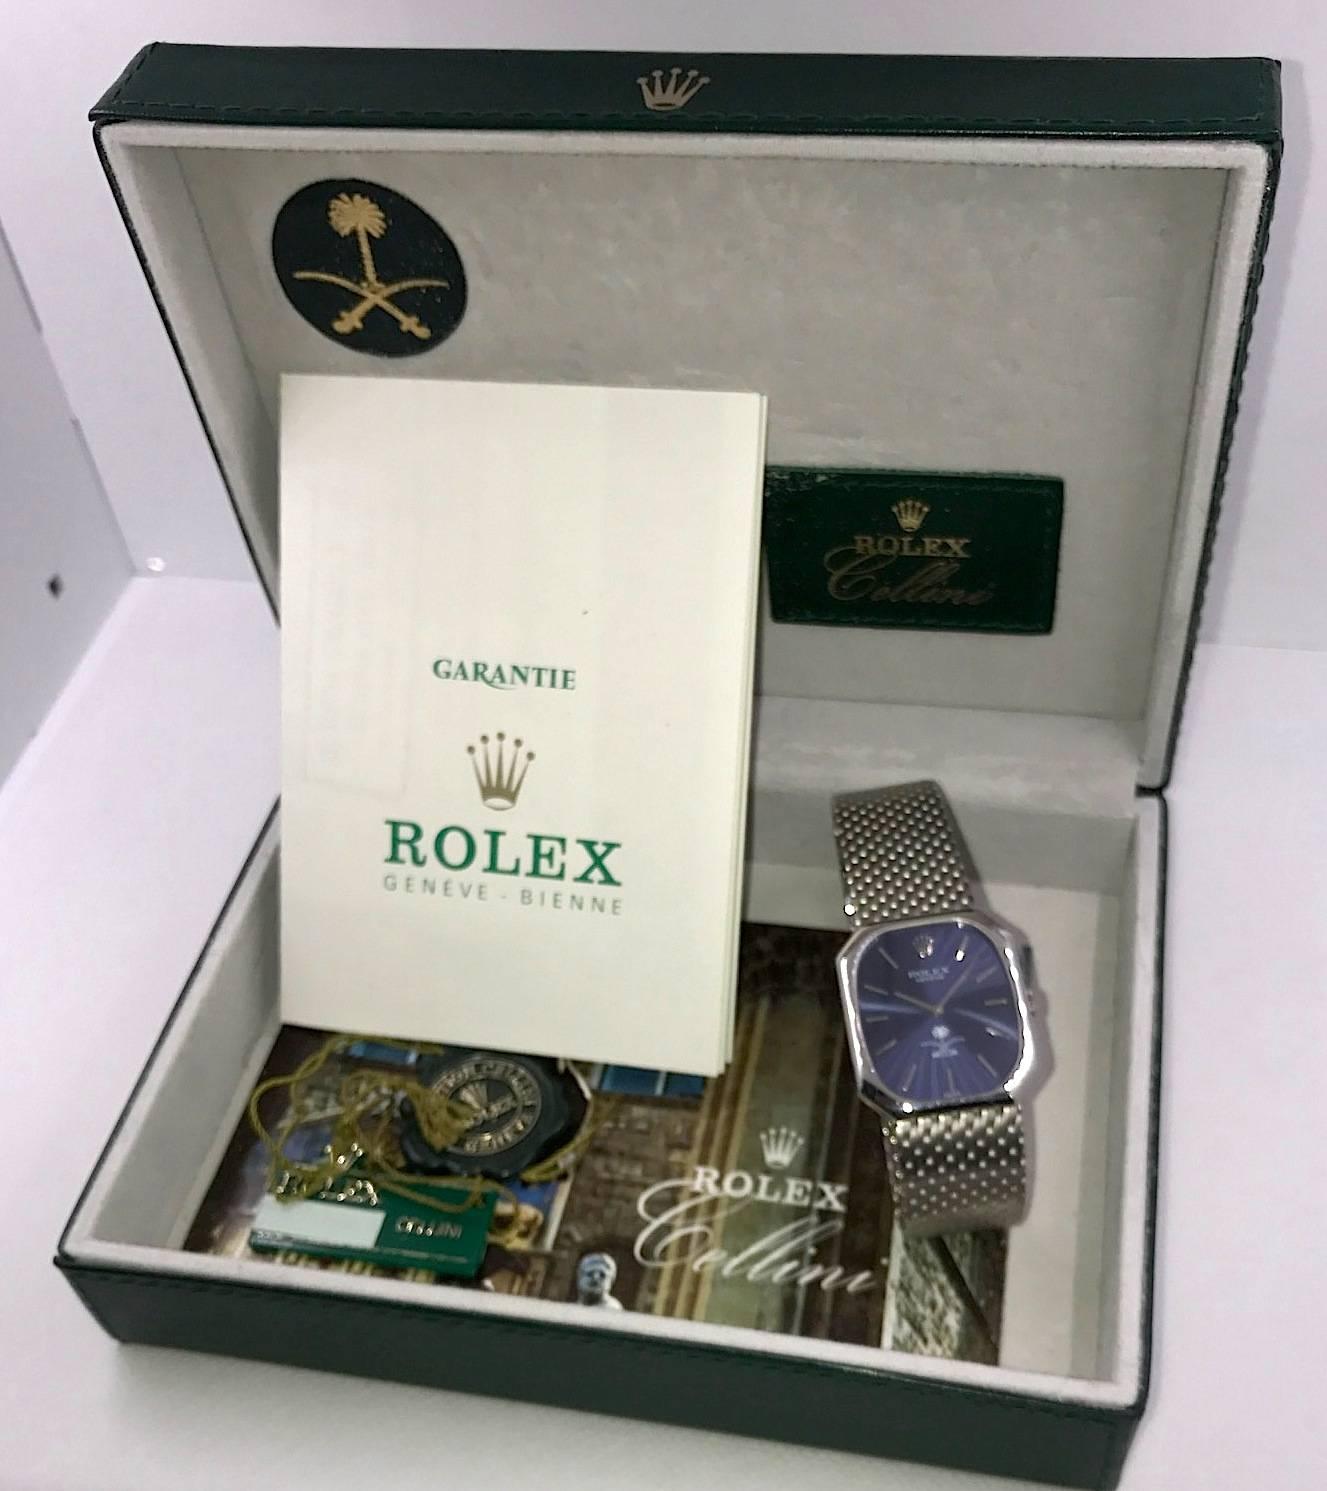 Rolex Cellini 18K White Gold Manual Wind Wristwatch
Factory Blue Gloss Dial with Saudi Arabia Logo
Rare Edition Sold Only in Saudi Arabia 
18K White Gold Smooth Bezel
27mm x 32mm
Rolex Manual Wind Movement
Sapphire Crystal
Original Sticker is Still